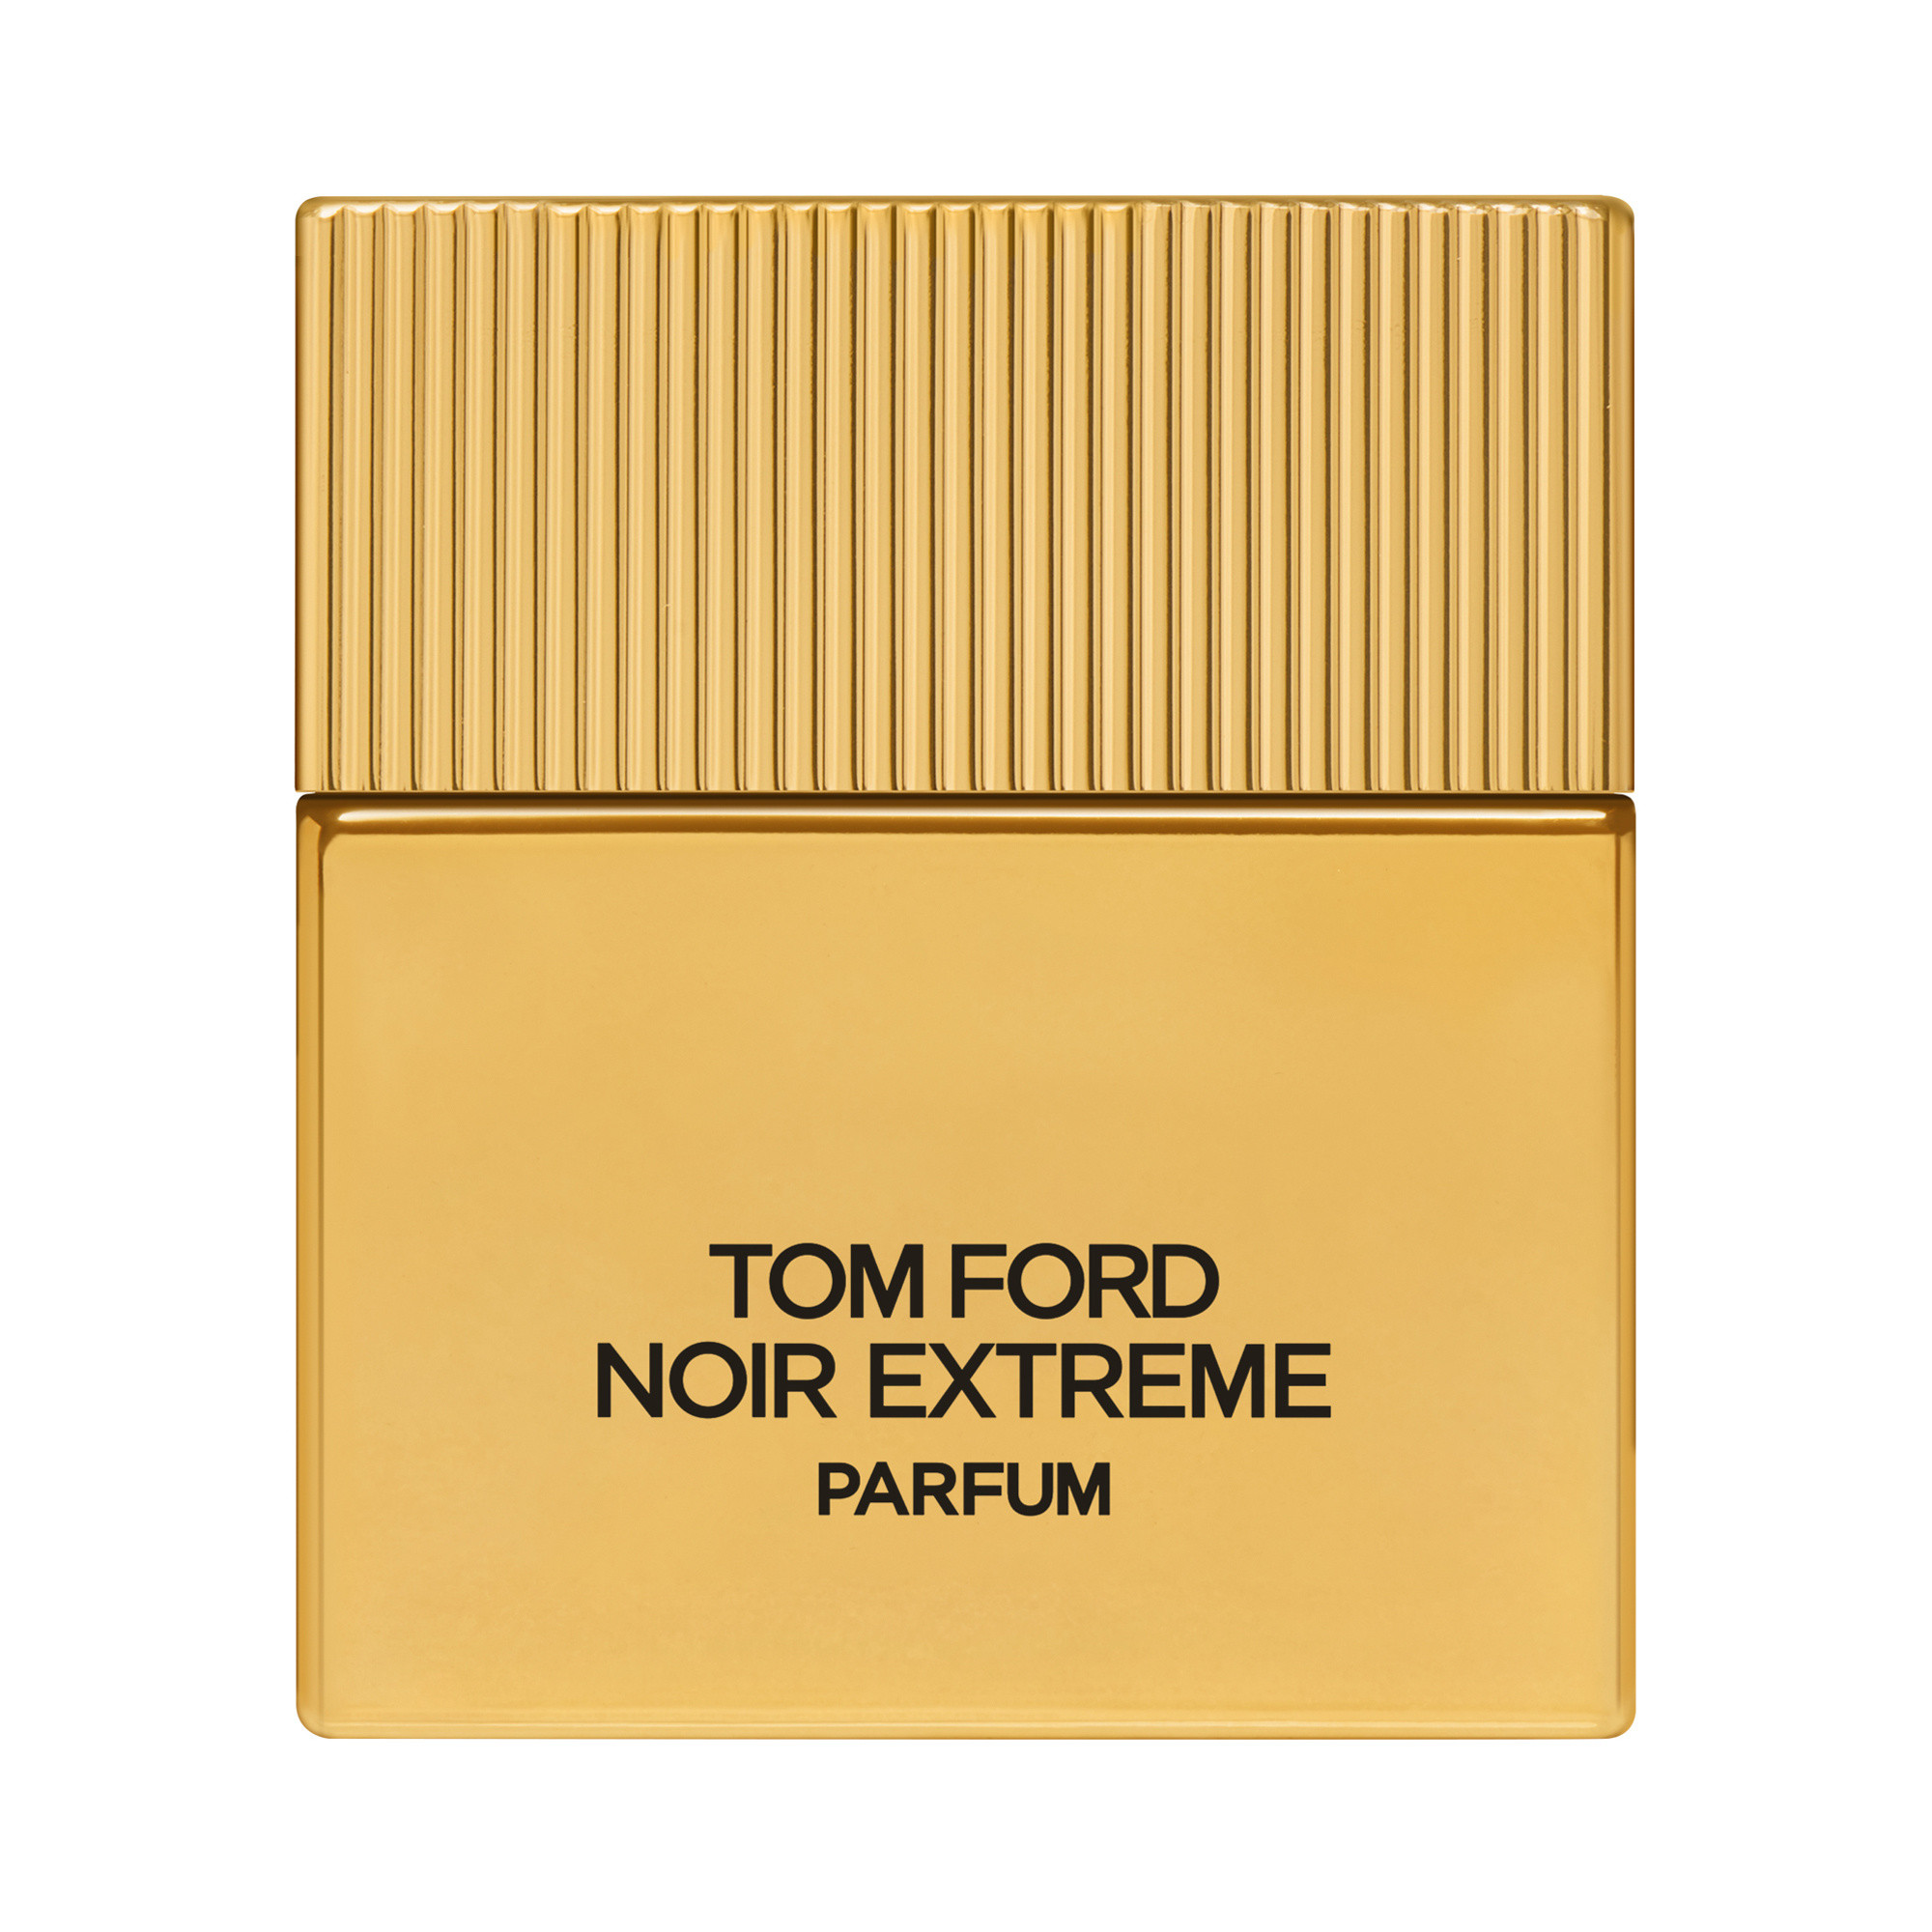 Tom Ford Beauty - Noir Extreme Parfum 50 ml, Golden Yellow, large image number 0